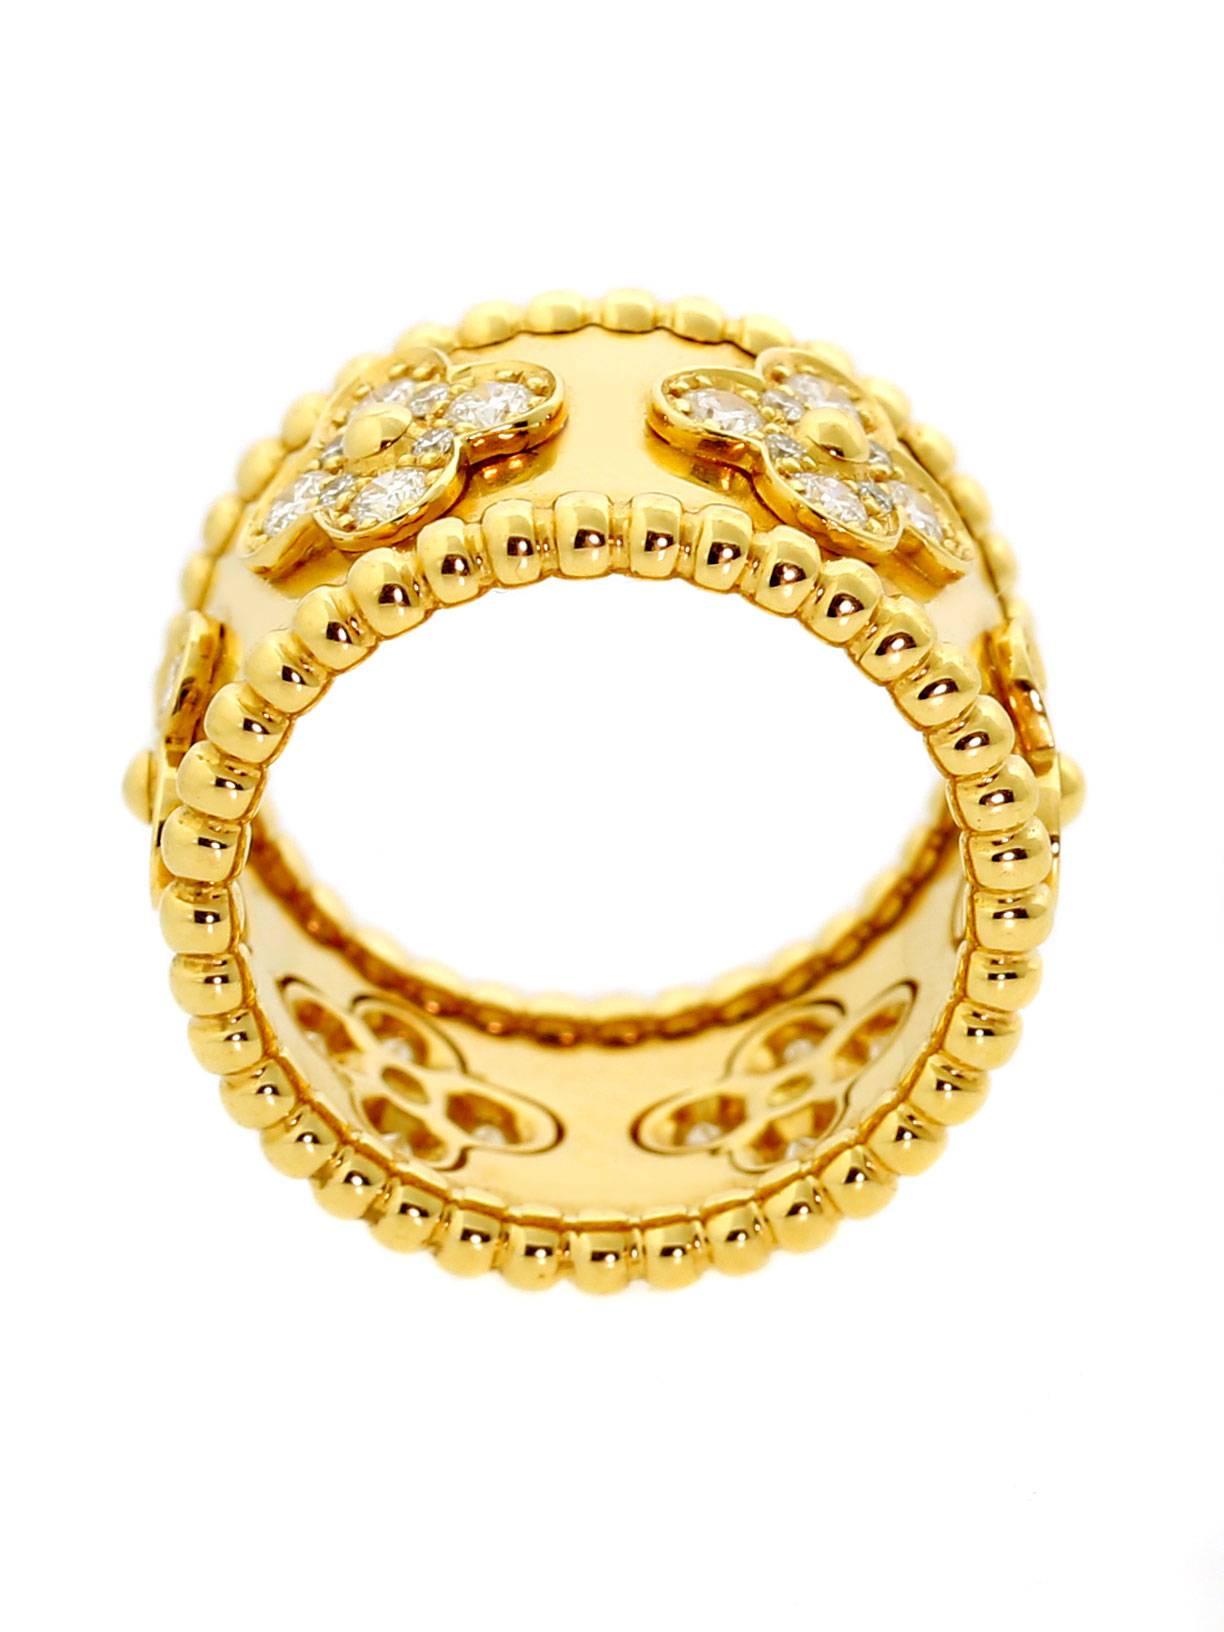 Van Cleef & Arpels Perlee diamond ring in 18k yellow gold featuring a beaded edge followed by the iconic Alhambra motif adorned with 48 fine round brilliant cut diamonds.

Size: EU 51     US 5 3/4

Diamonds: 48 Round Brilliant Cut If-Vvs1